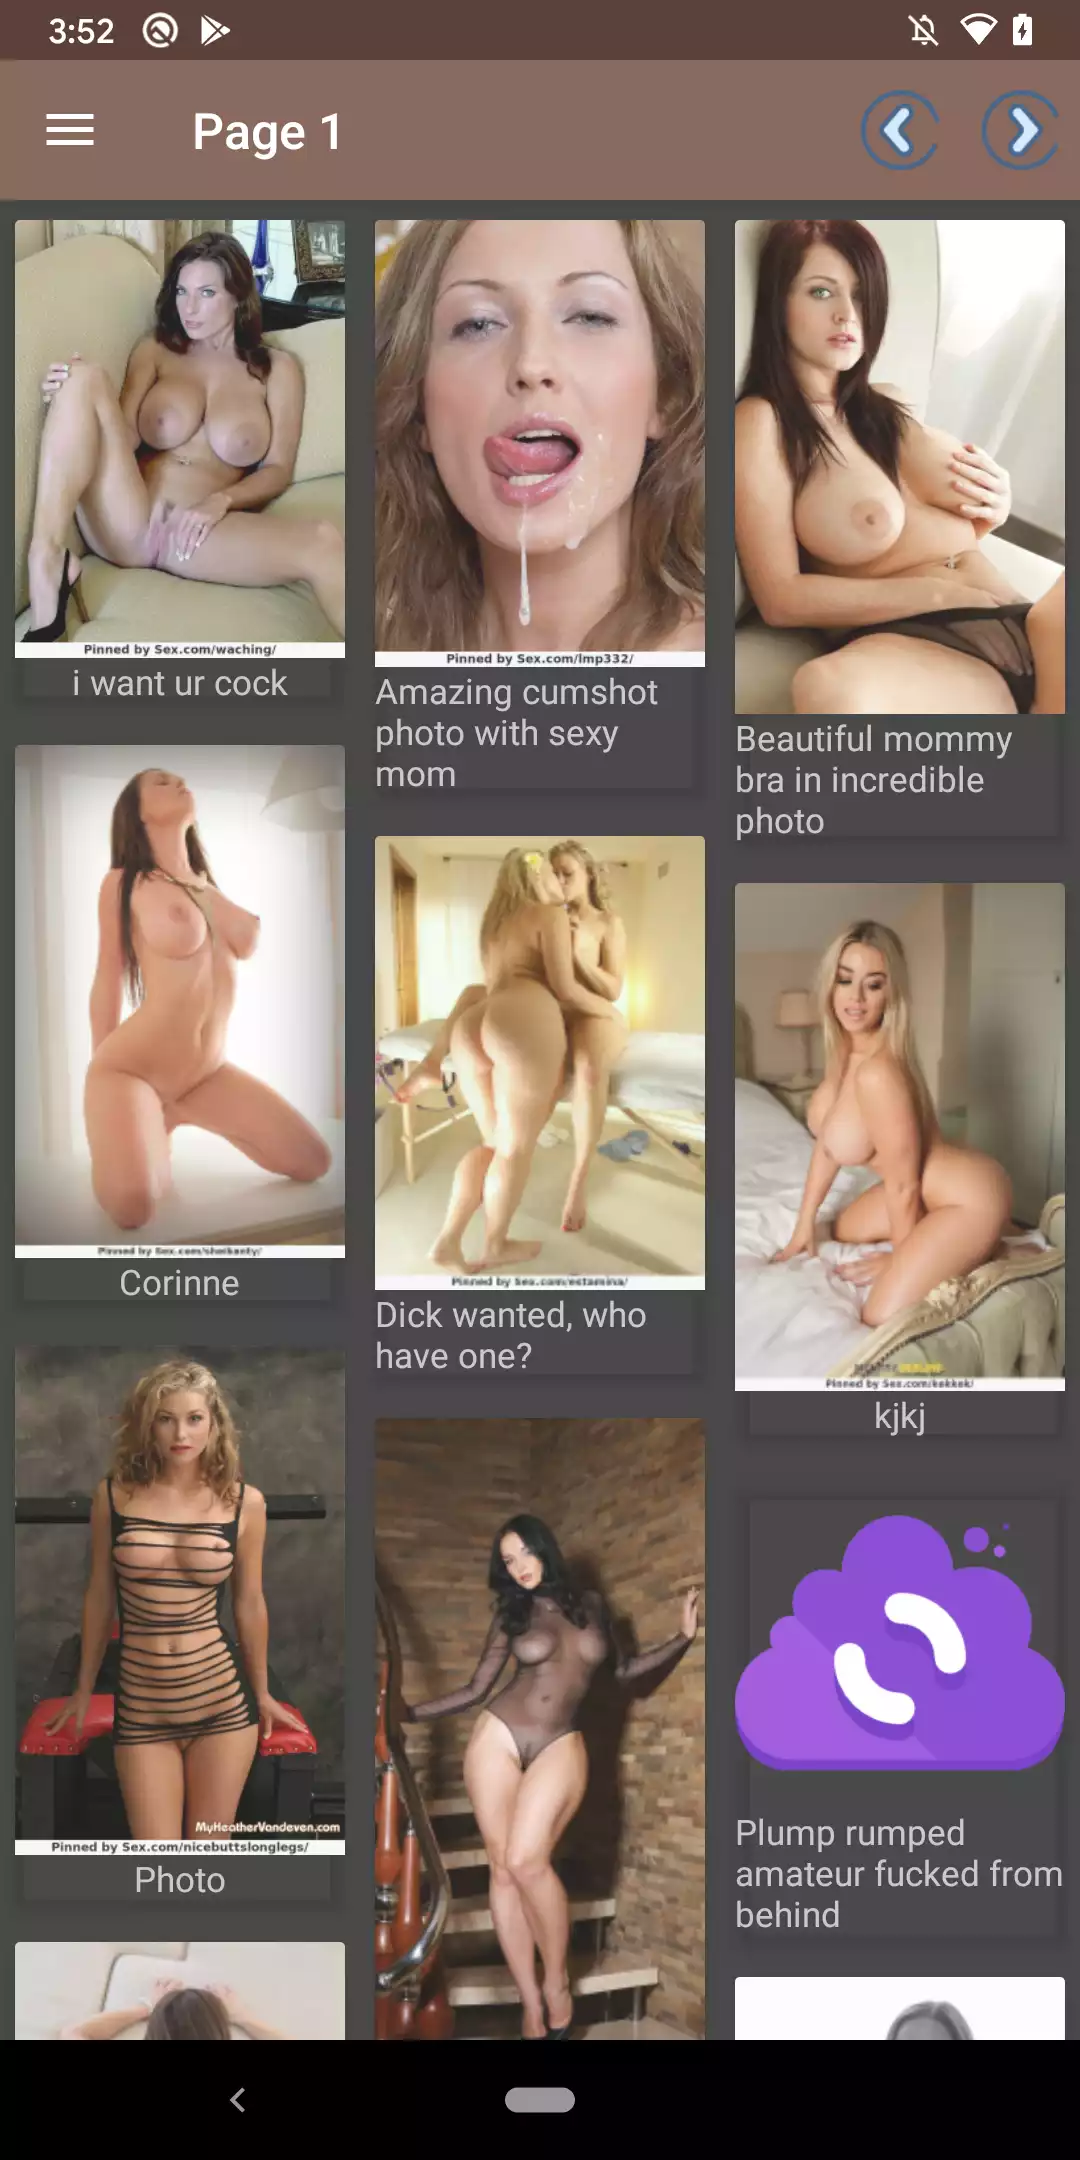 Hot Milf Pics collection,hentai,hot,fuck,mythras,android,wallpaper,sexy,photo,panties,apk,apps,pics,free,demonic,galleries,pictures,porn,pornstar,milf,lair,feast,edit,app,best,cfnm